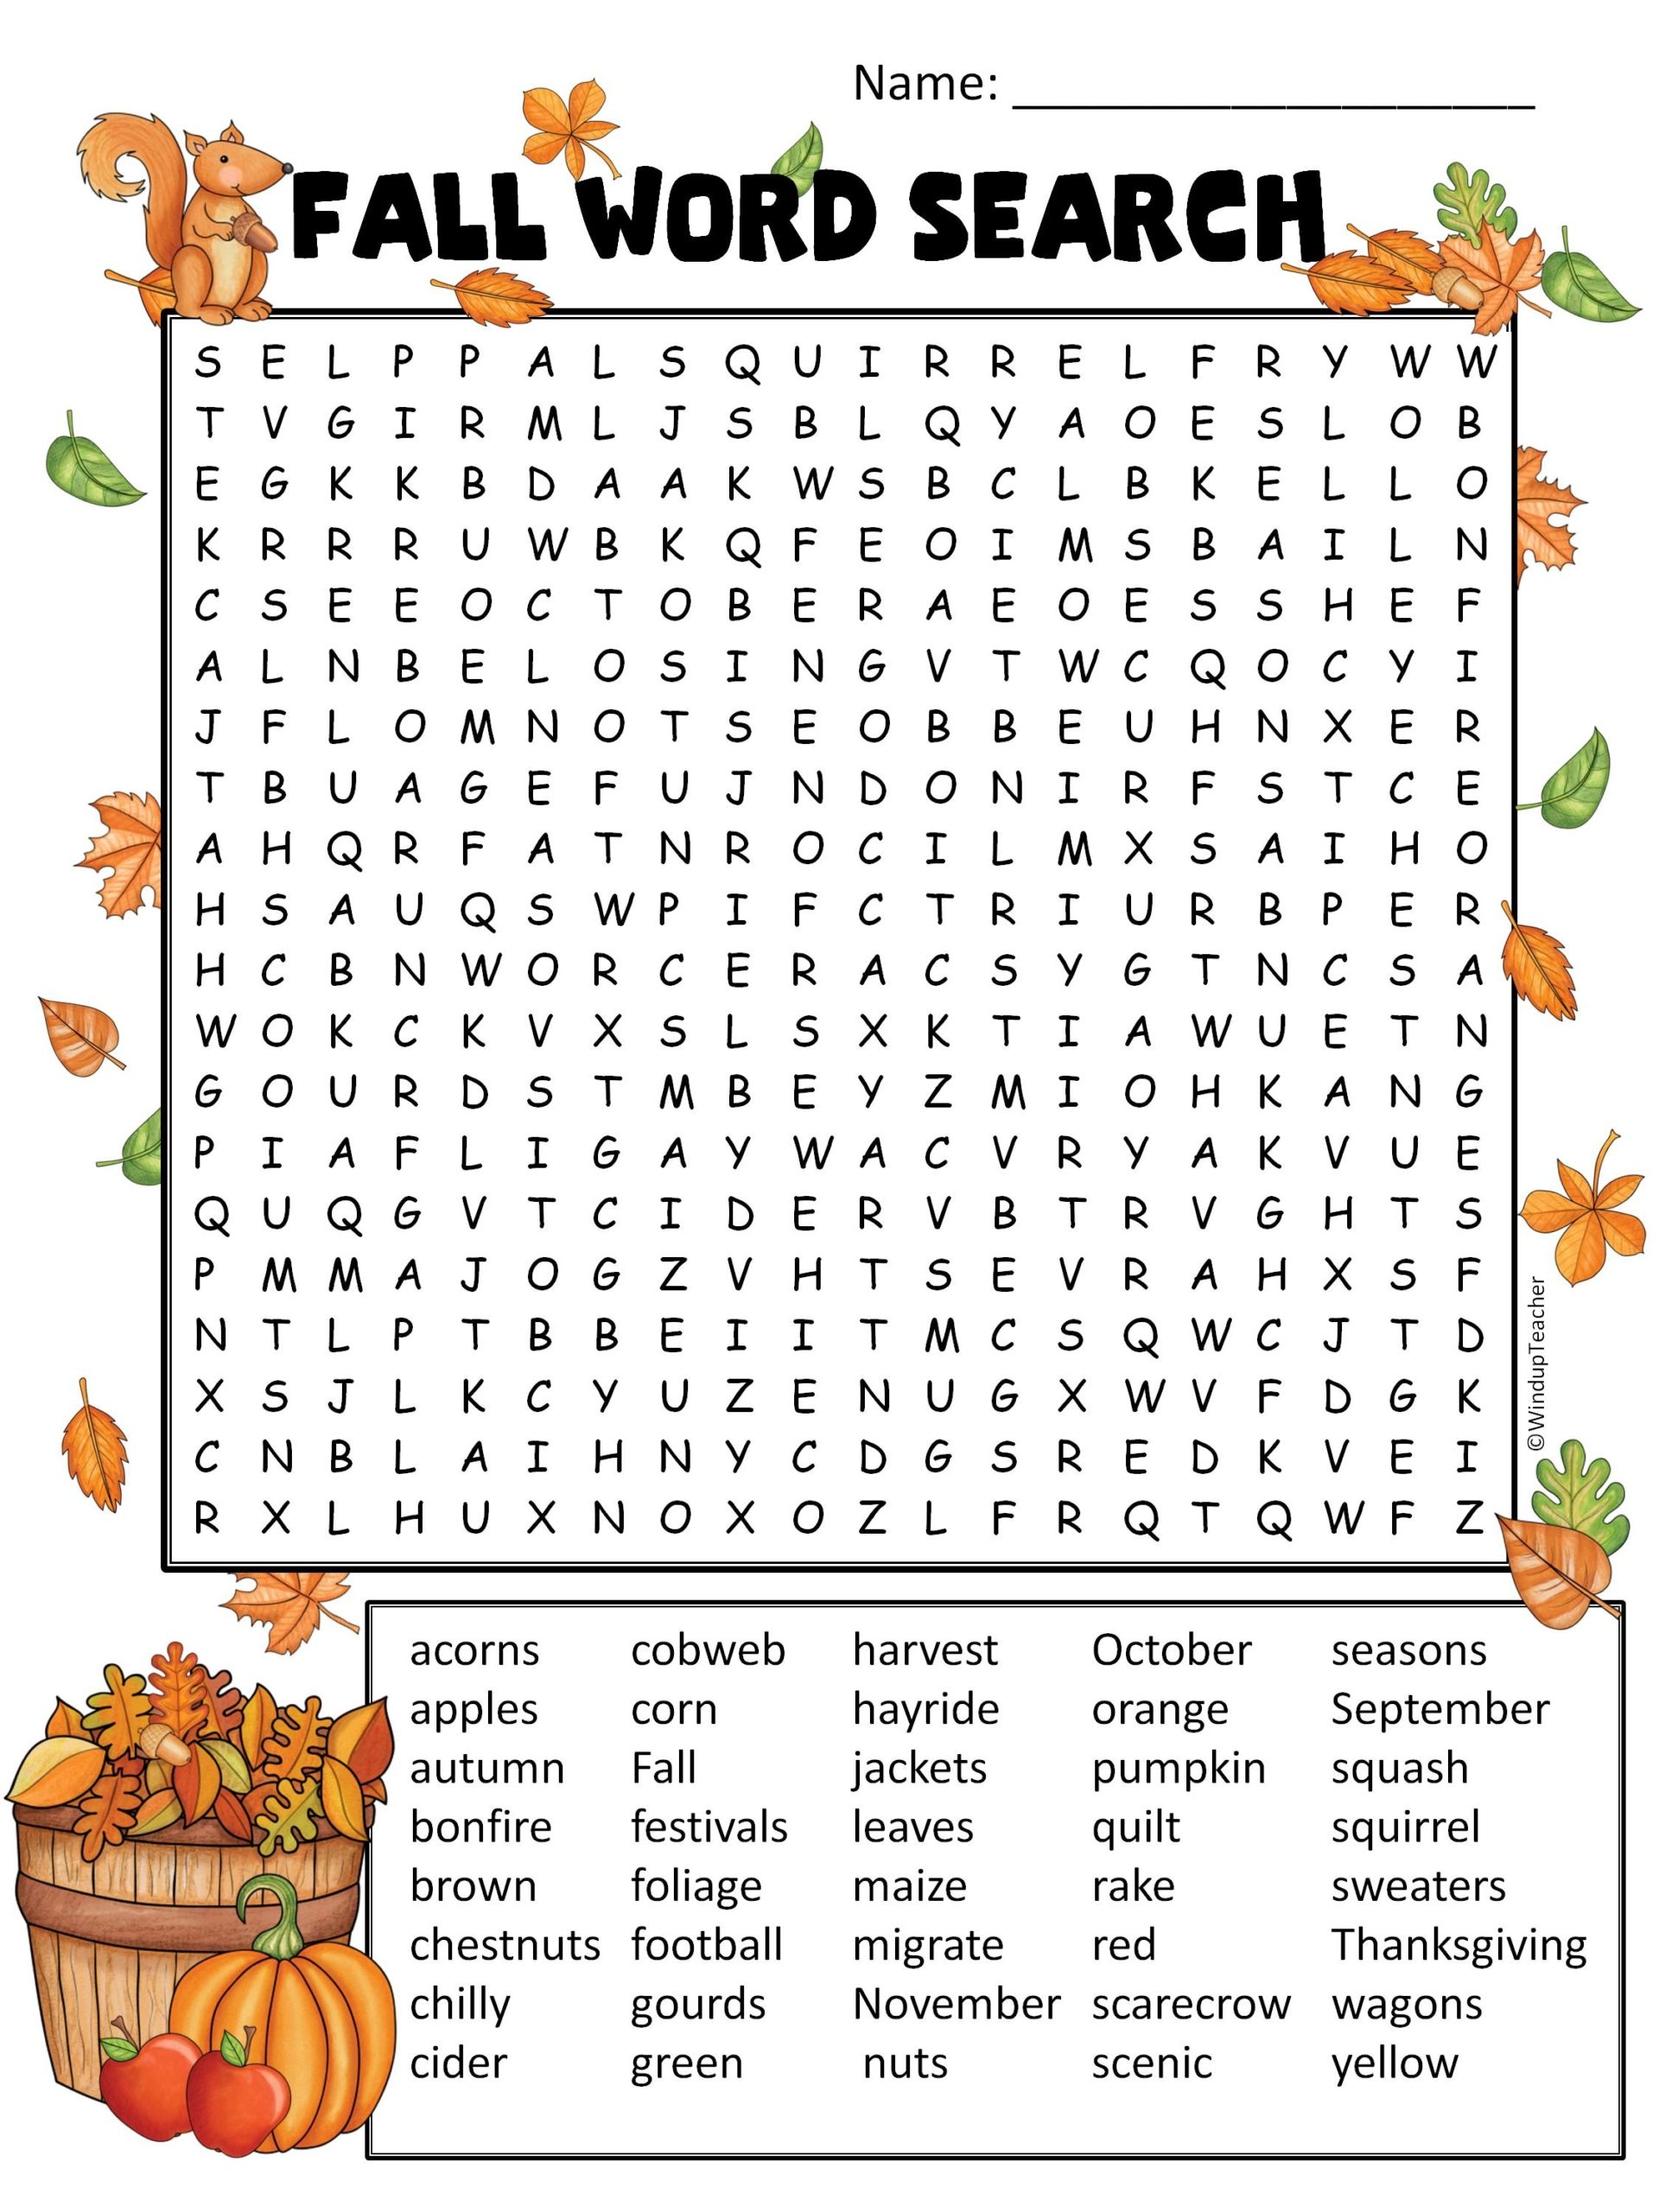 Fall Word Searches For Adults